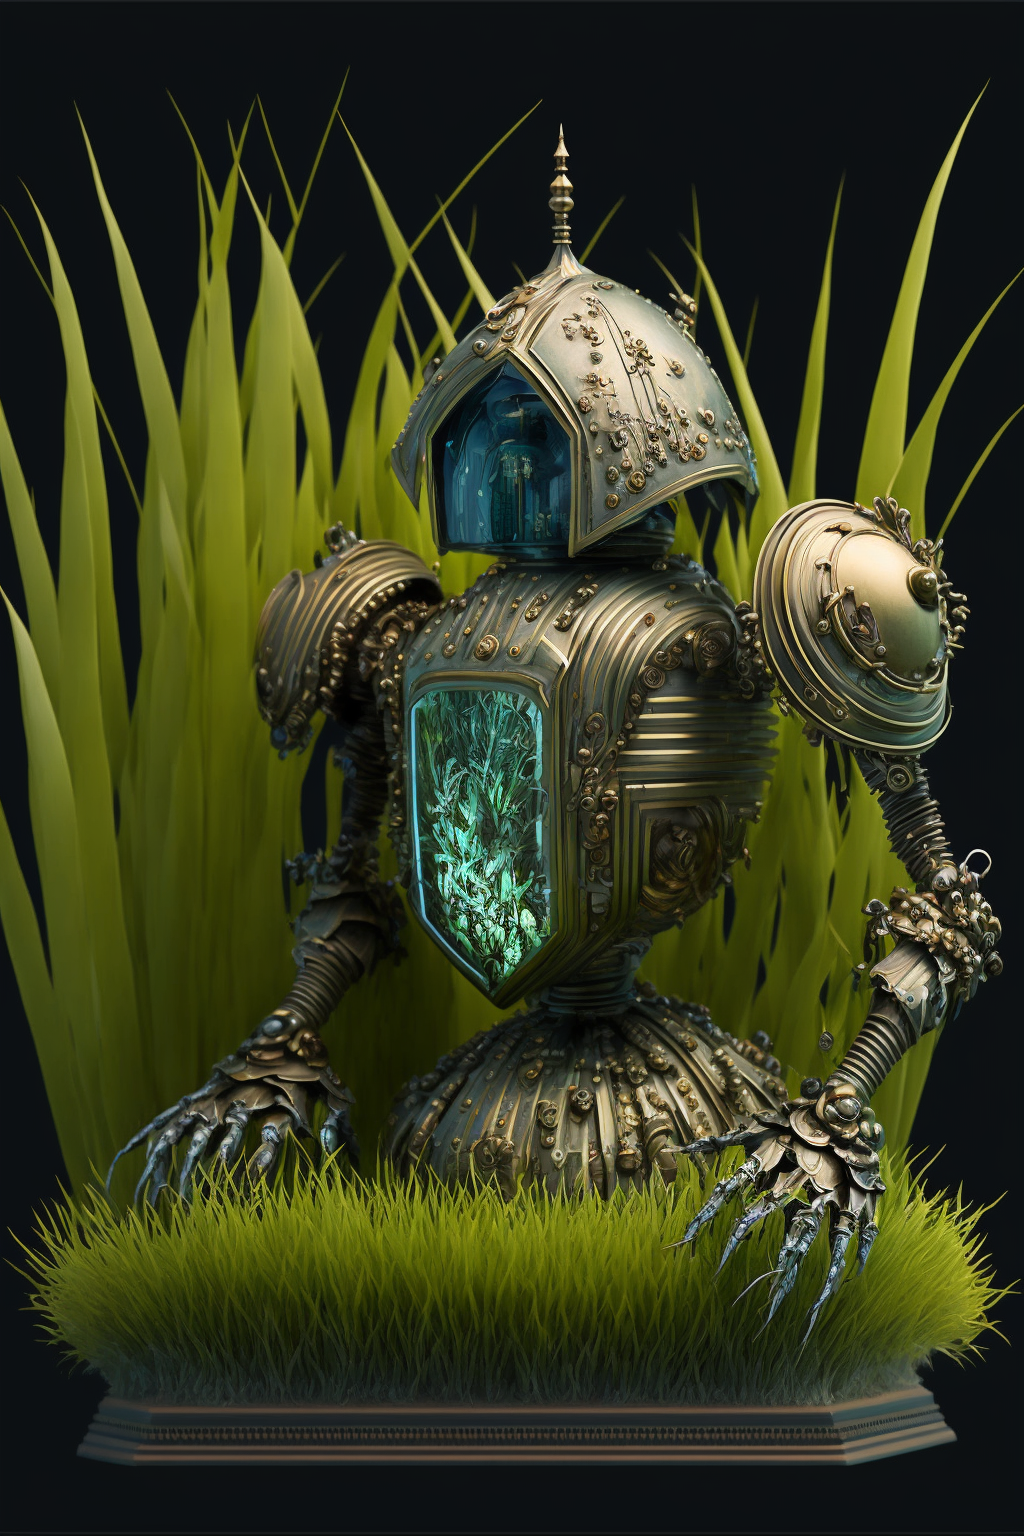 Grass in the style of Robotique-Baroque 3